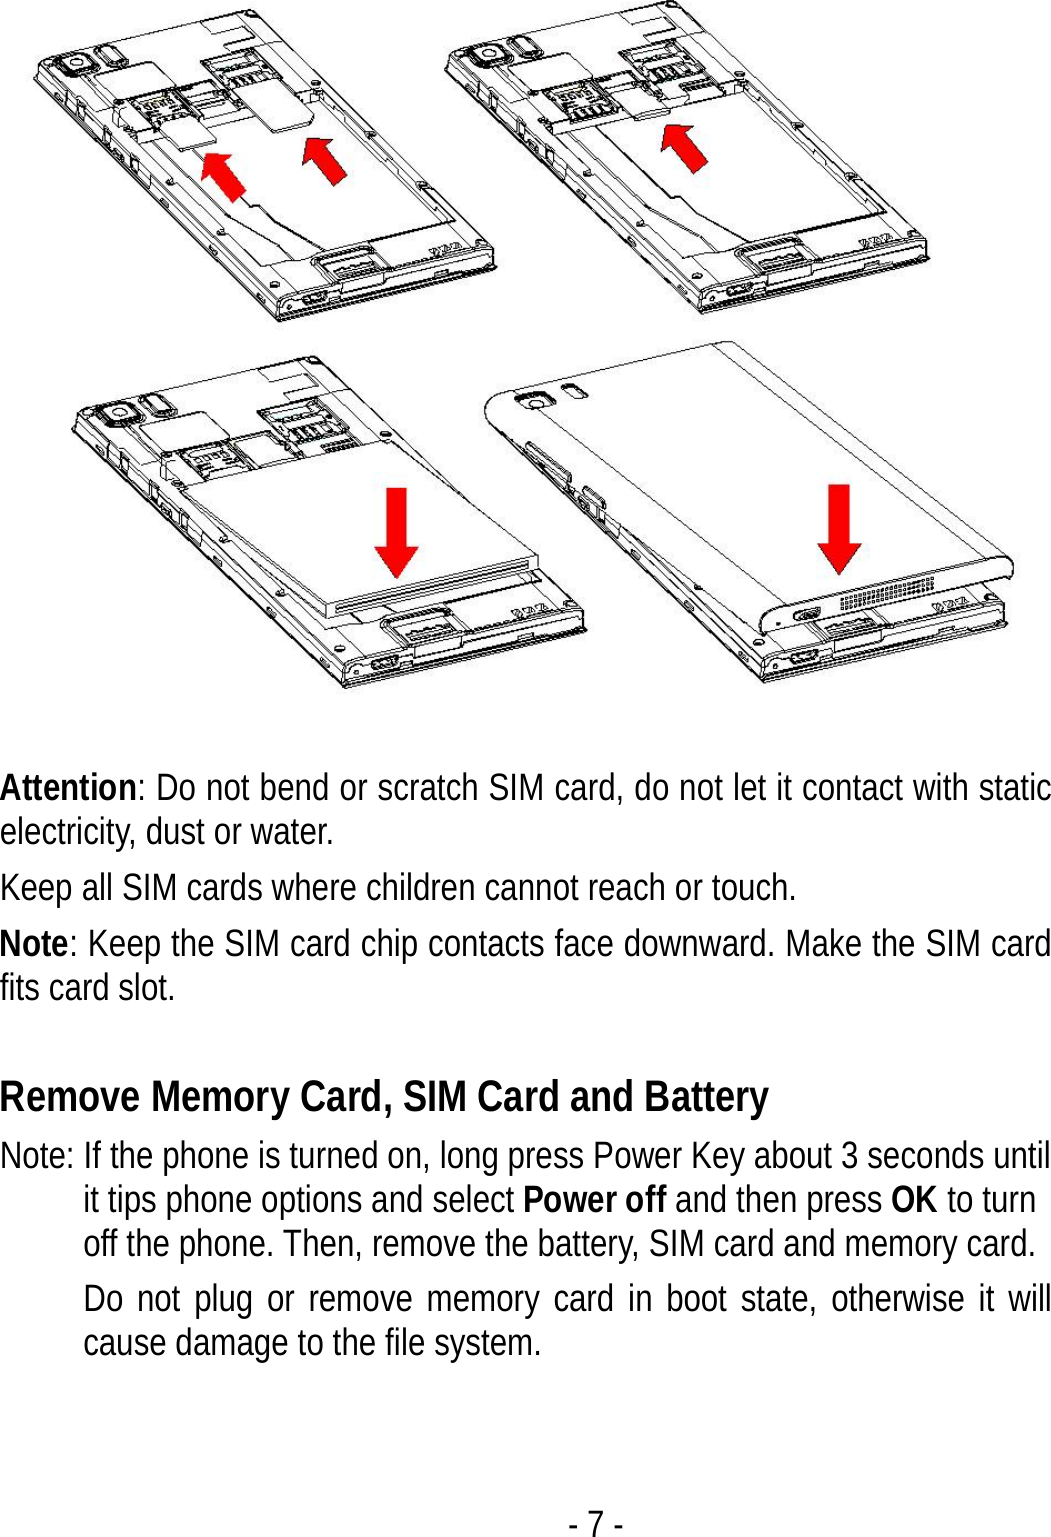  - 7 -  Attention: Do not bend or scratch SIM card, do not let it contact with static electricity, dust or water. Keep all SIM cards where children cannot reach or touch. Note: Keep the SIM card chip contacts face downward. Make the SIM card fits card slot.  Remove Memory Card, SIM Card and Battery   Note: If the phone is turned on, long press Power Key about 3 seconds until it tips phone options and select Power off and then press OK to turn off the phone. Then, remove the battery, SIM card and memory card.   Do not plug or remove memory card in boot state, otherwise it will cause damage to the file system.  